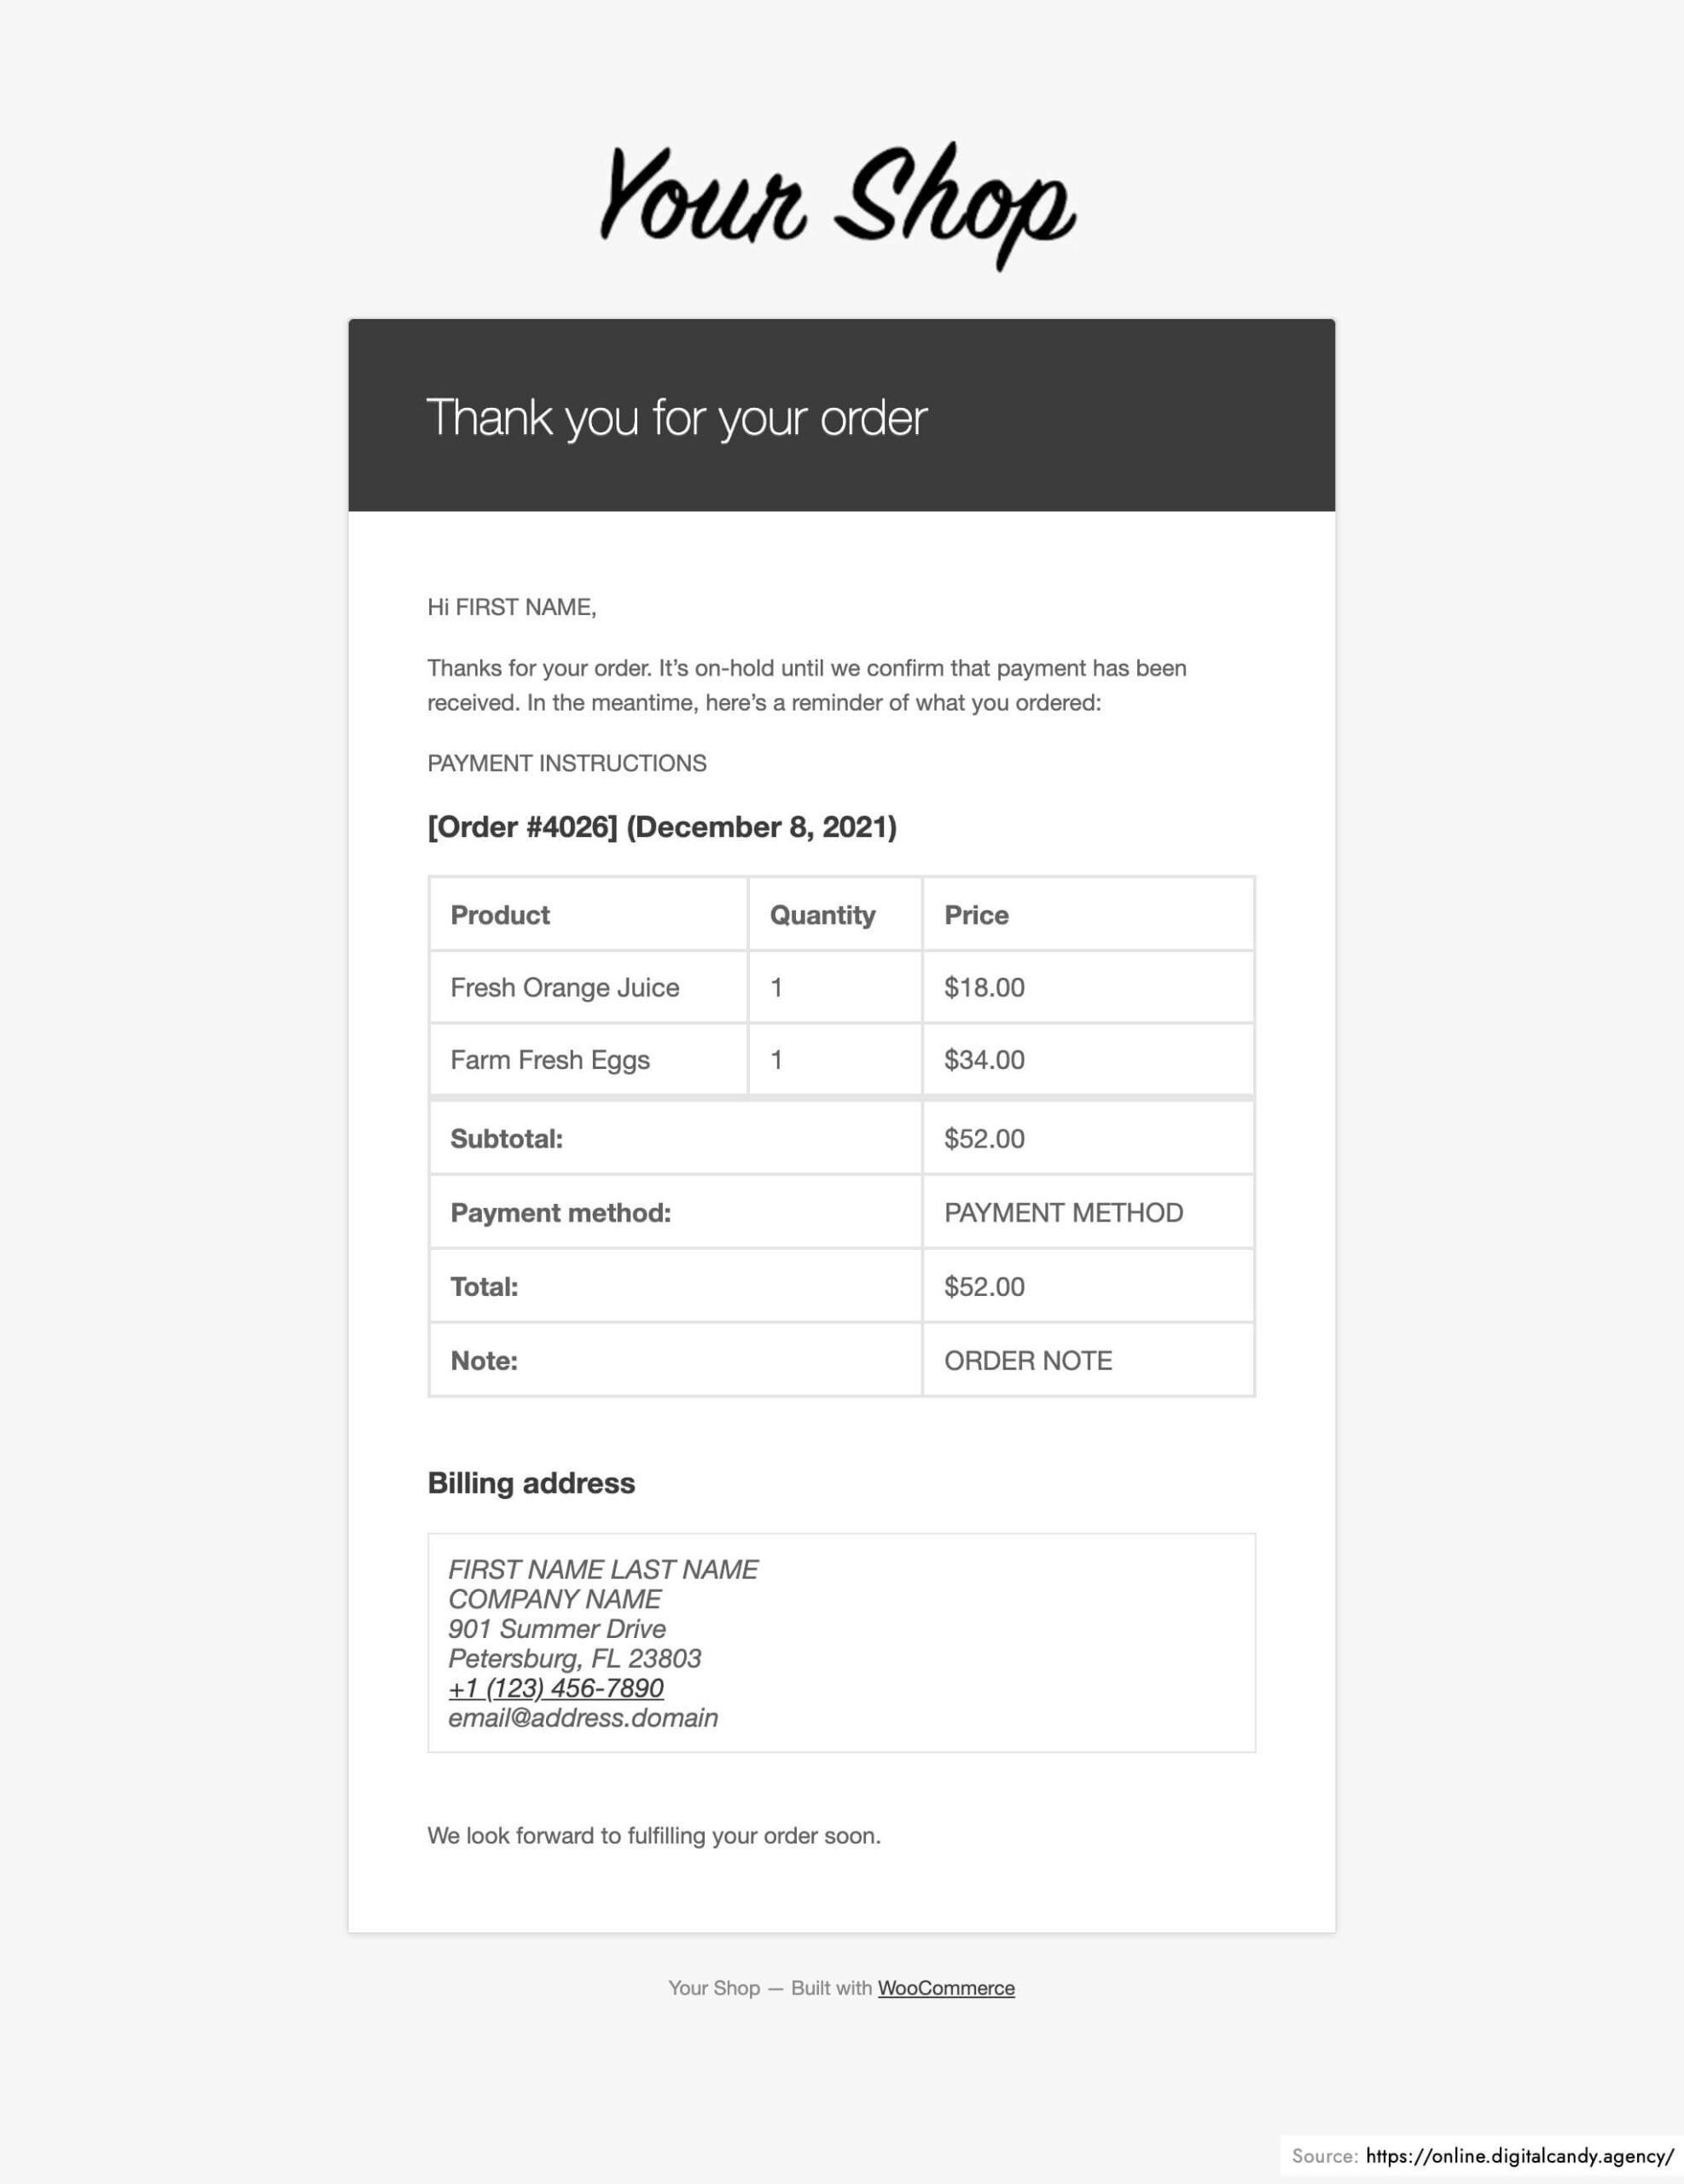 woocommerce customer email - order on hold